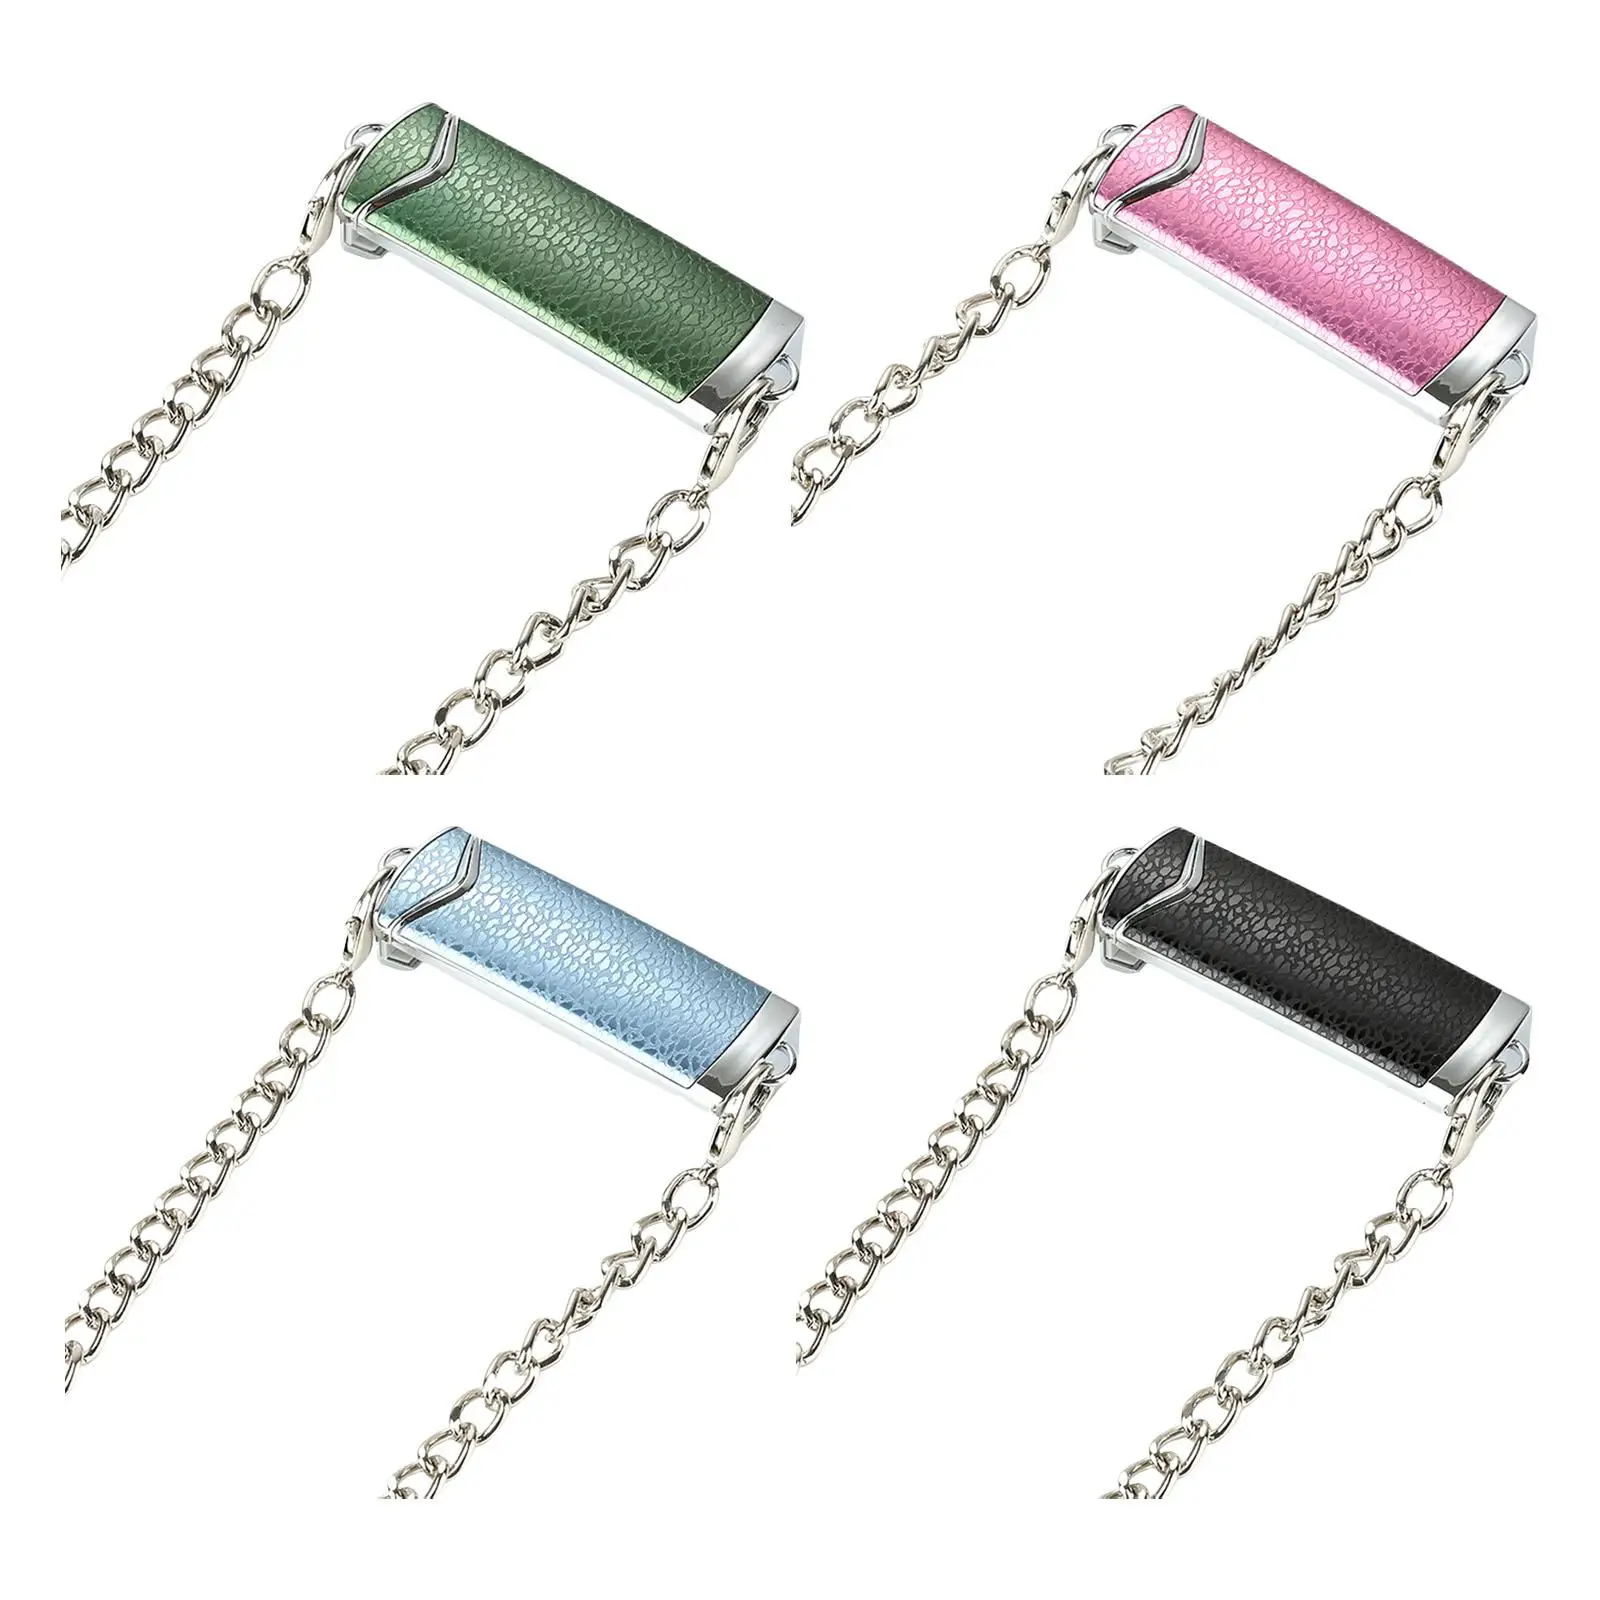 Mobile Phone Metal Chain Back Clip, Comfortable Free Your Hands Easily Accessible Portable Keep Phone Secure